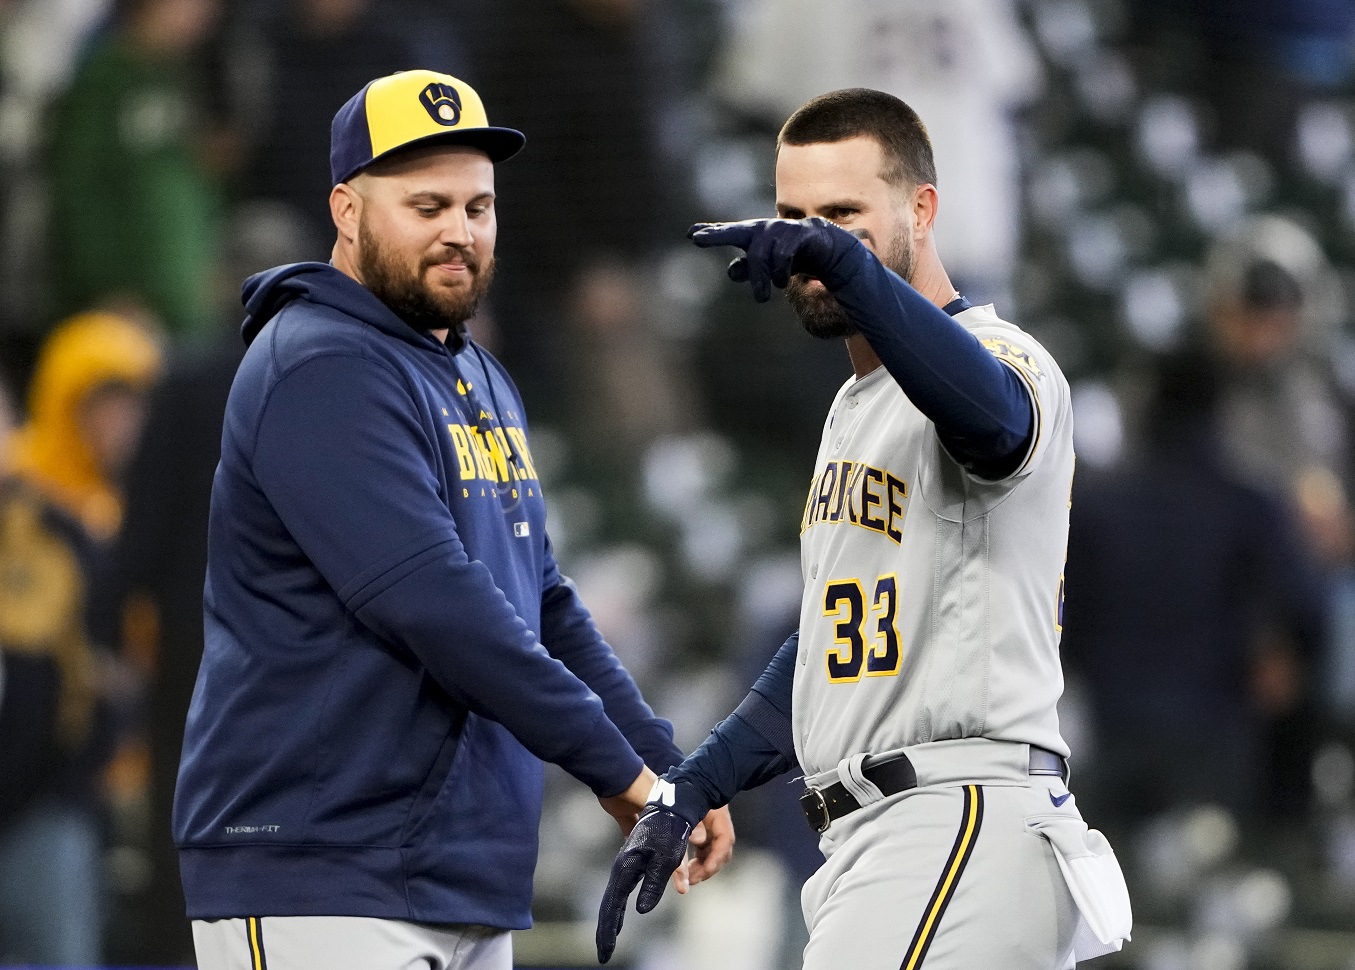 Turang drives in go-ahead run, Brewers defeat Mariners for 4th consecutive win